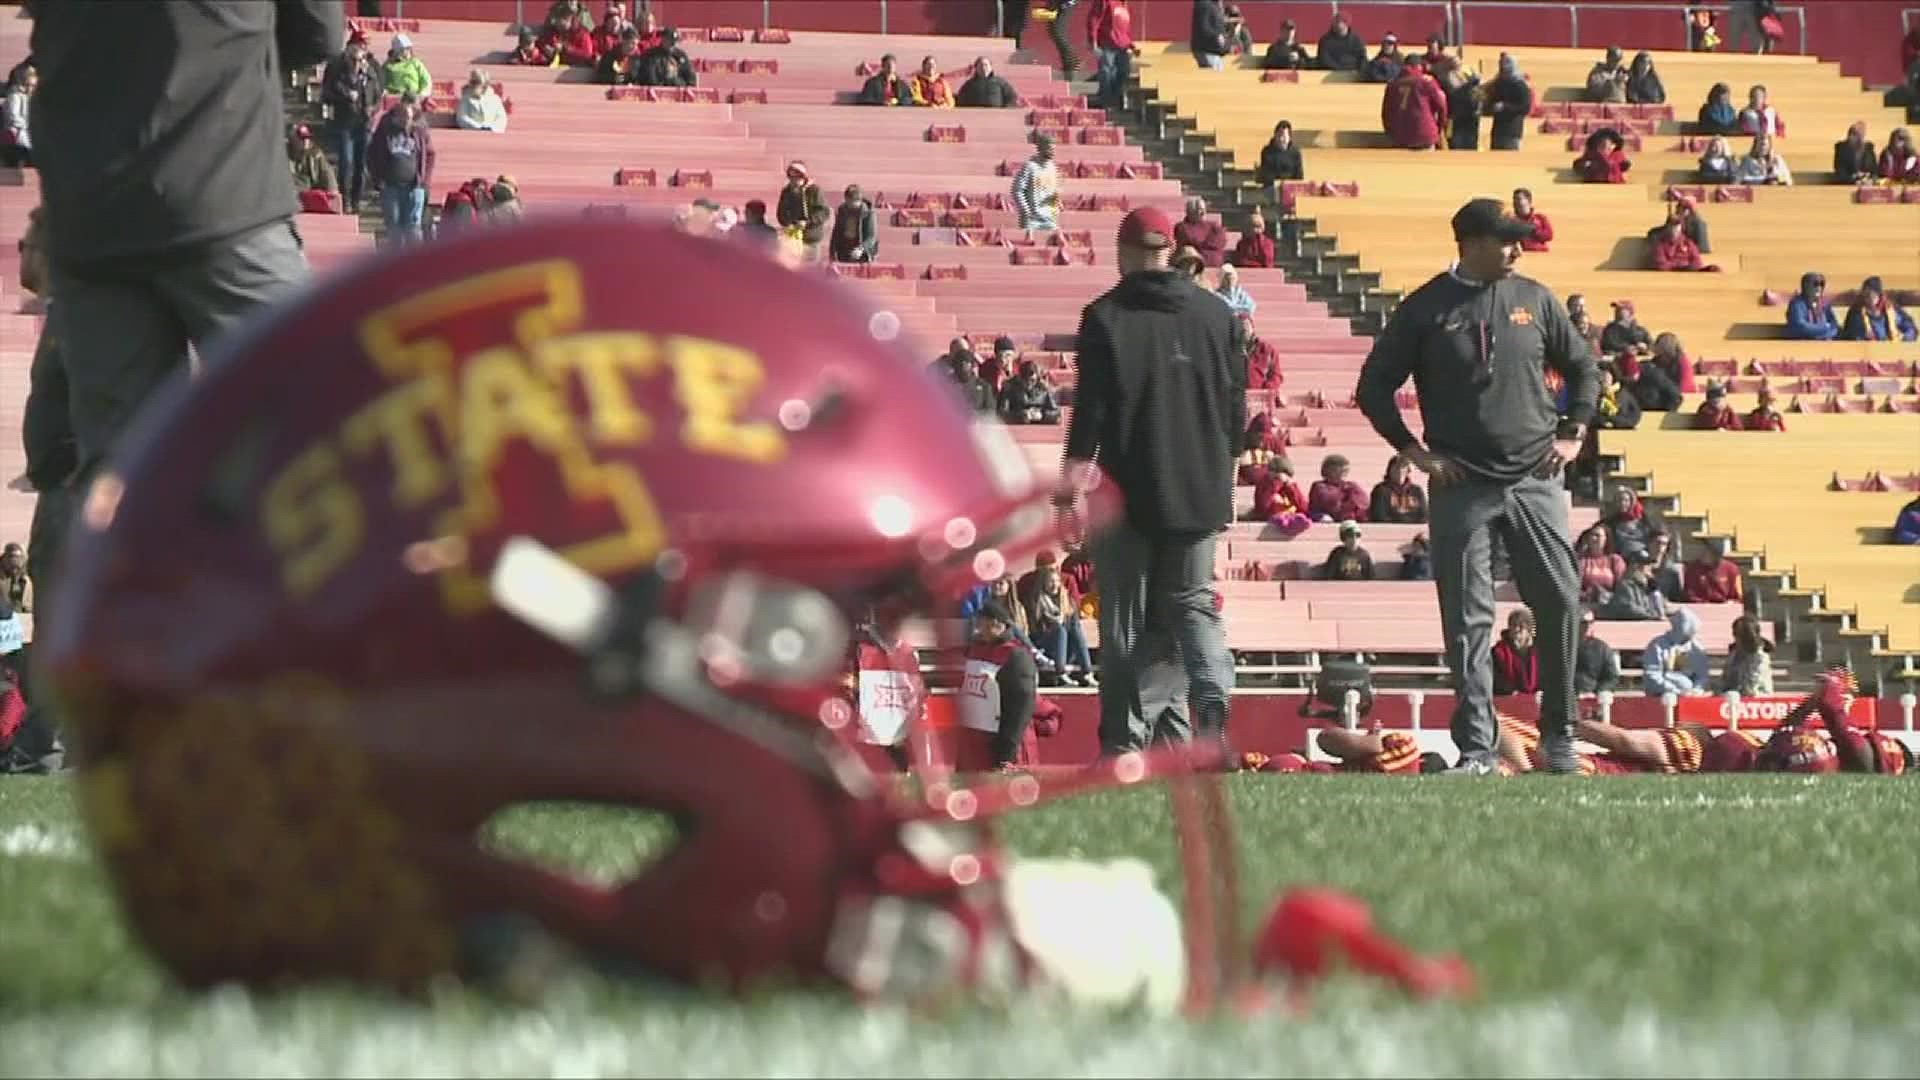 We take a look at what could happen to Iowa State now that Oklahoma and Texas won't be a part of their conference soon.